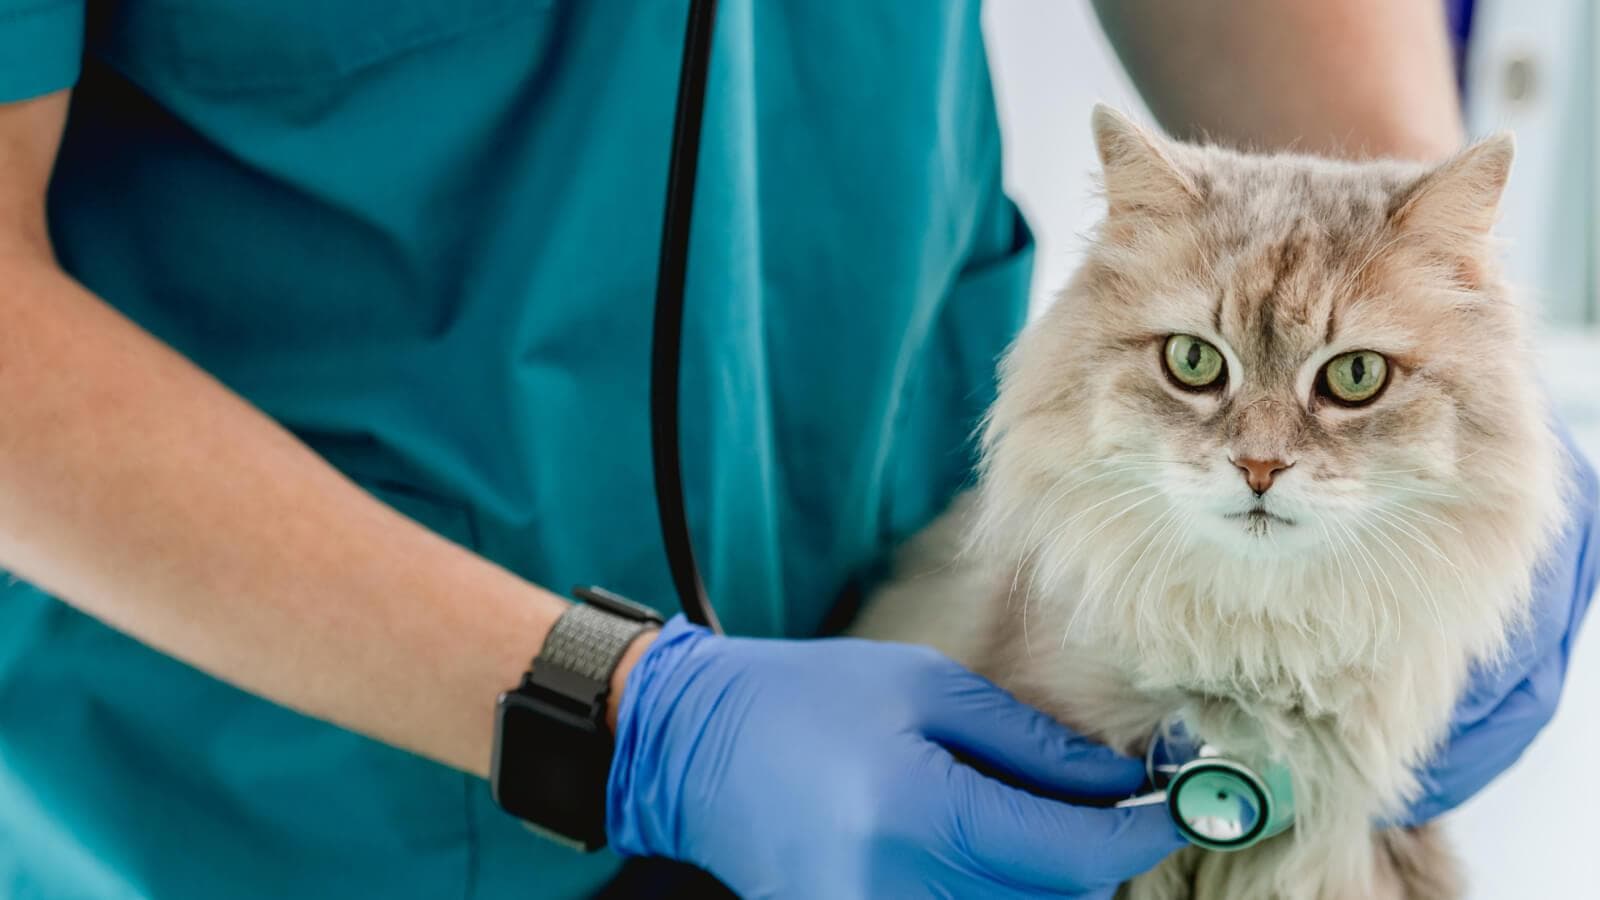 A veterinarian checking a cat's heart with stethoscope